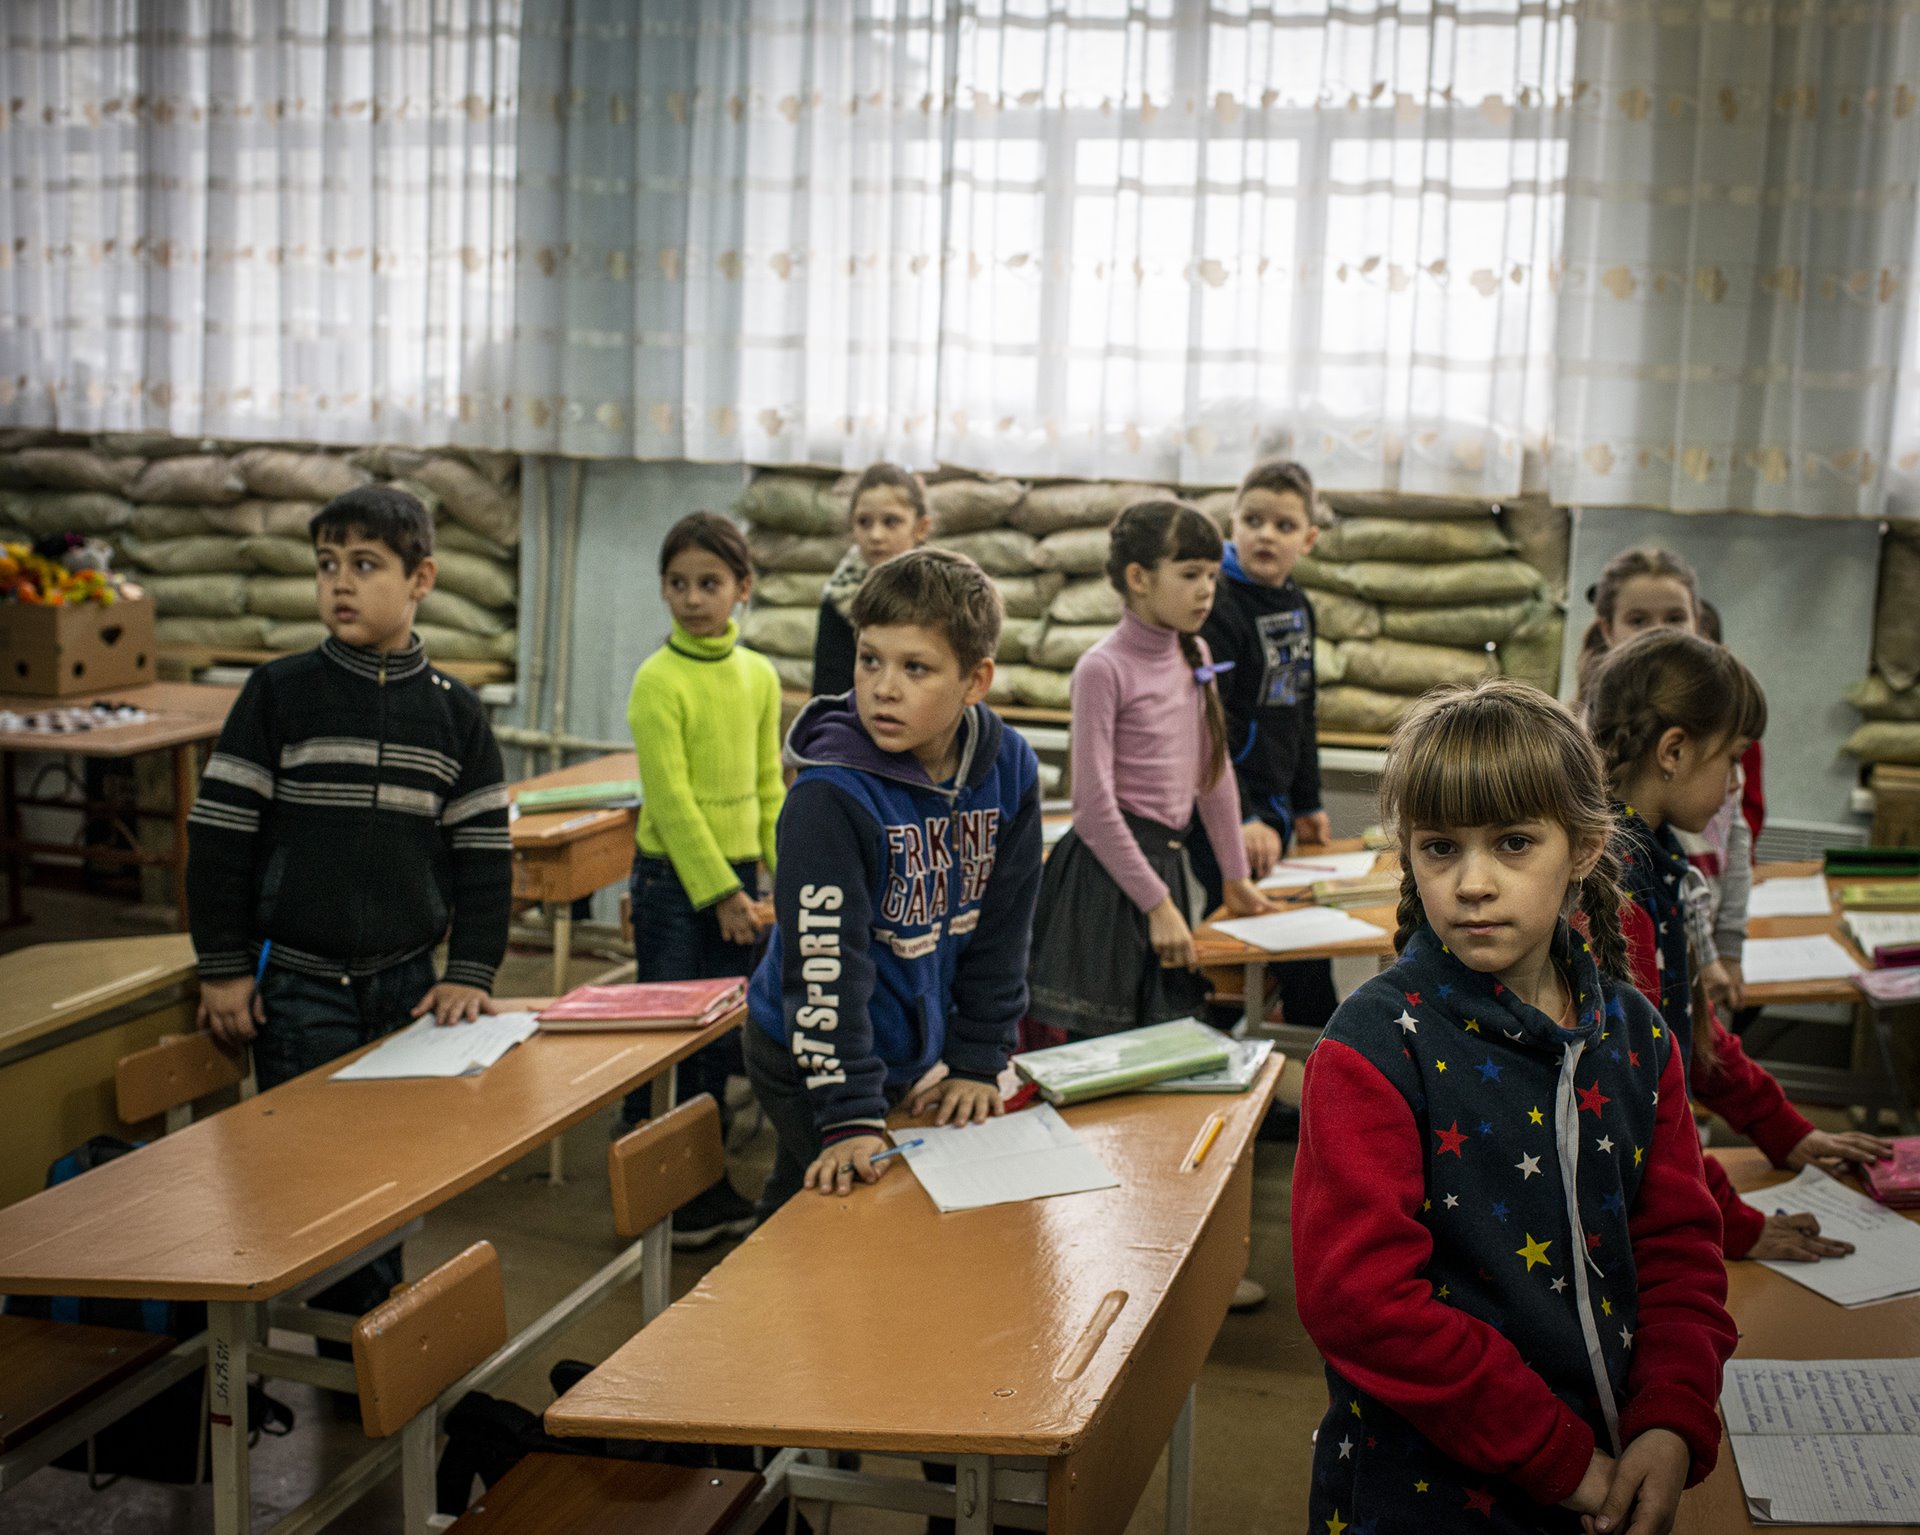 Students stand in a classroom of No. 2 school in Lenin Square, in Marinka, Donbas, Ukraine. The school remained open through the ongoing conflict between separatists and Ukraine government forces in the region.